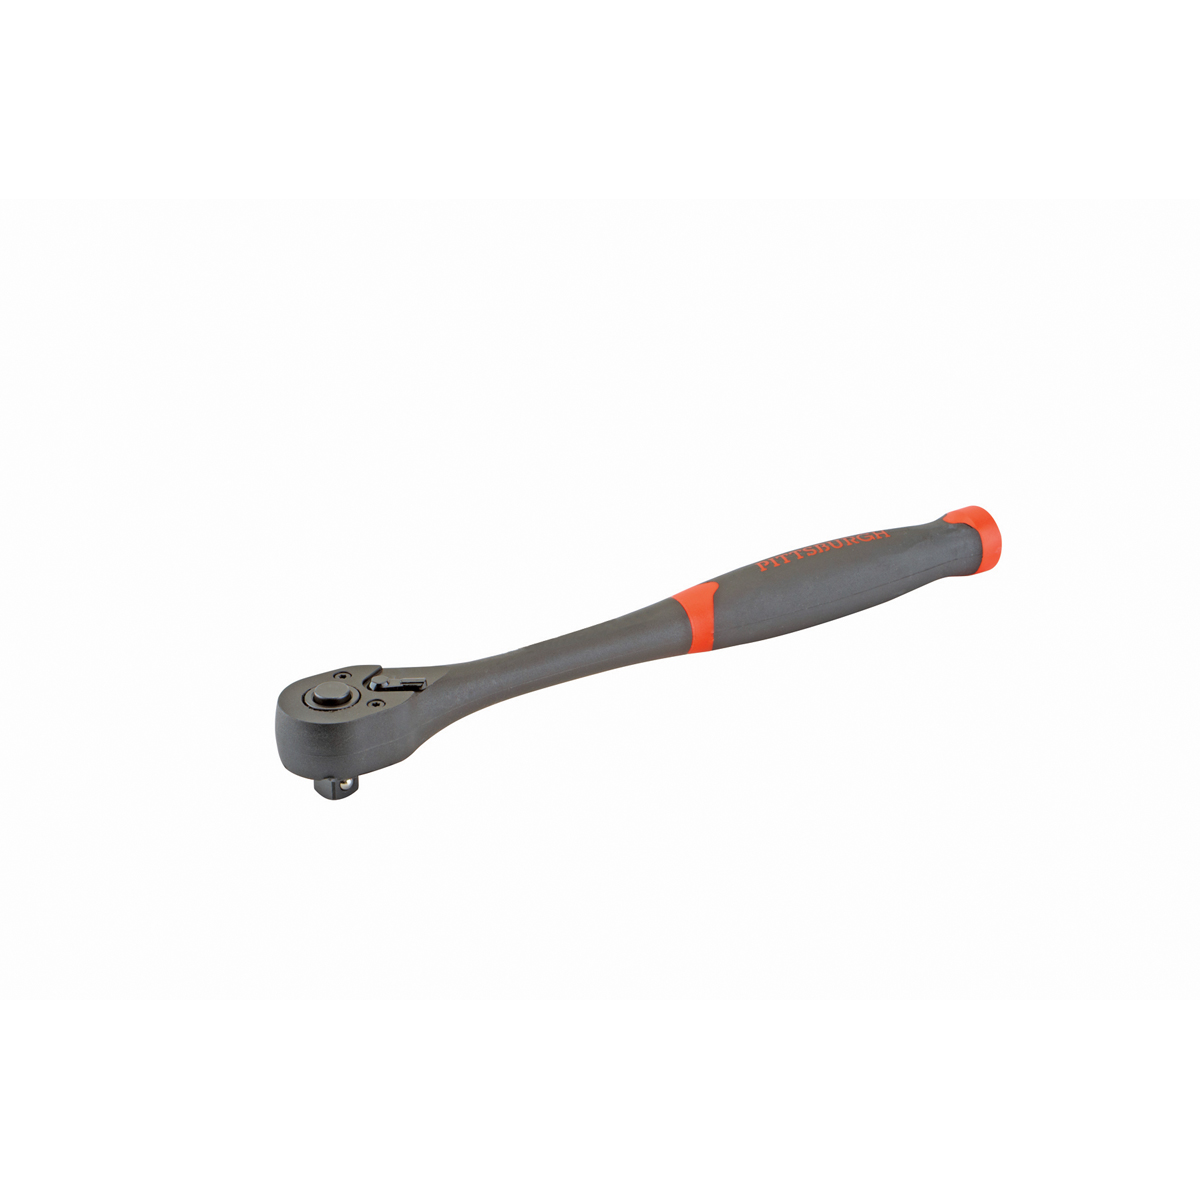 PITTSBURGH 3/8 in. Drive Professional Composite Tear Drop Ratchet - Item 62318